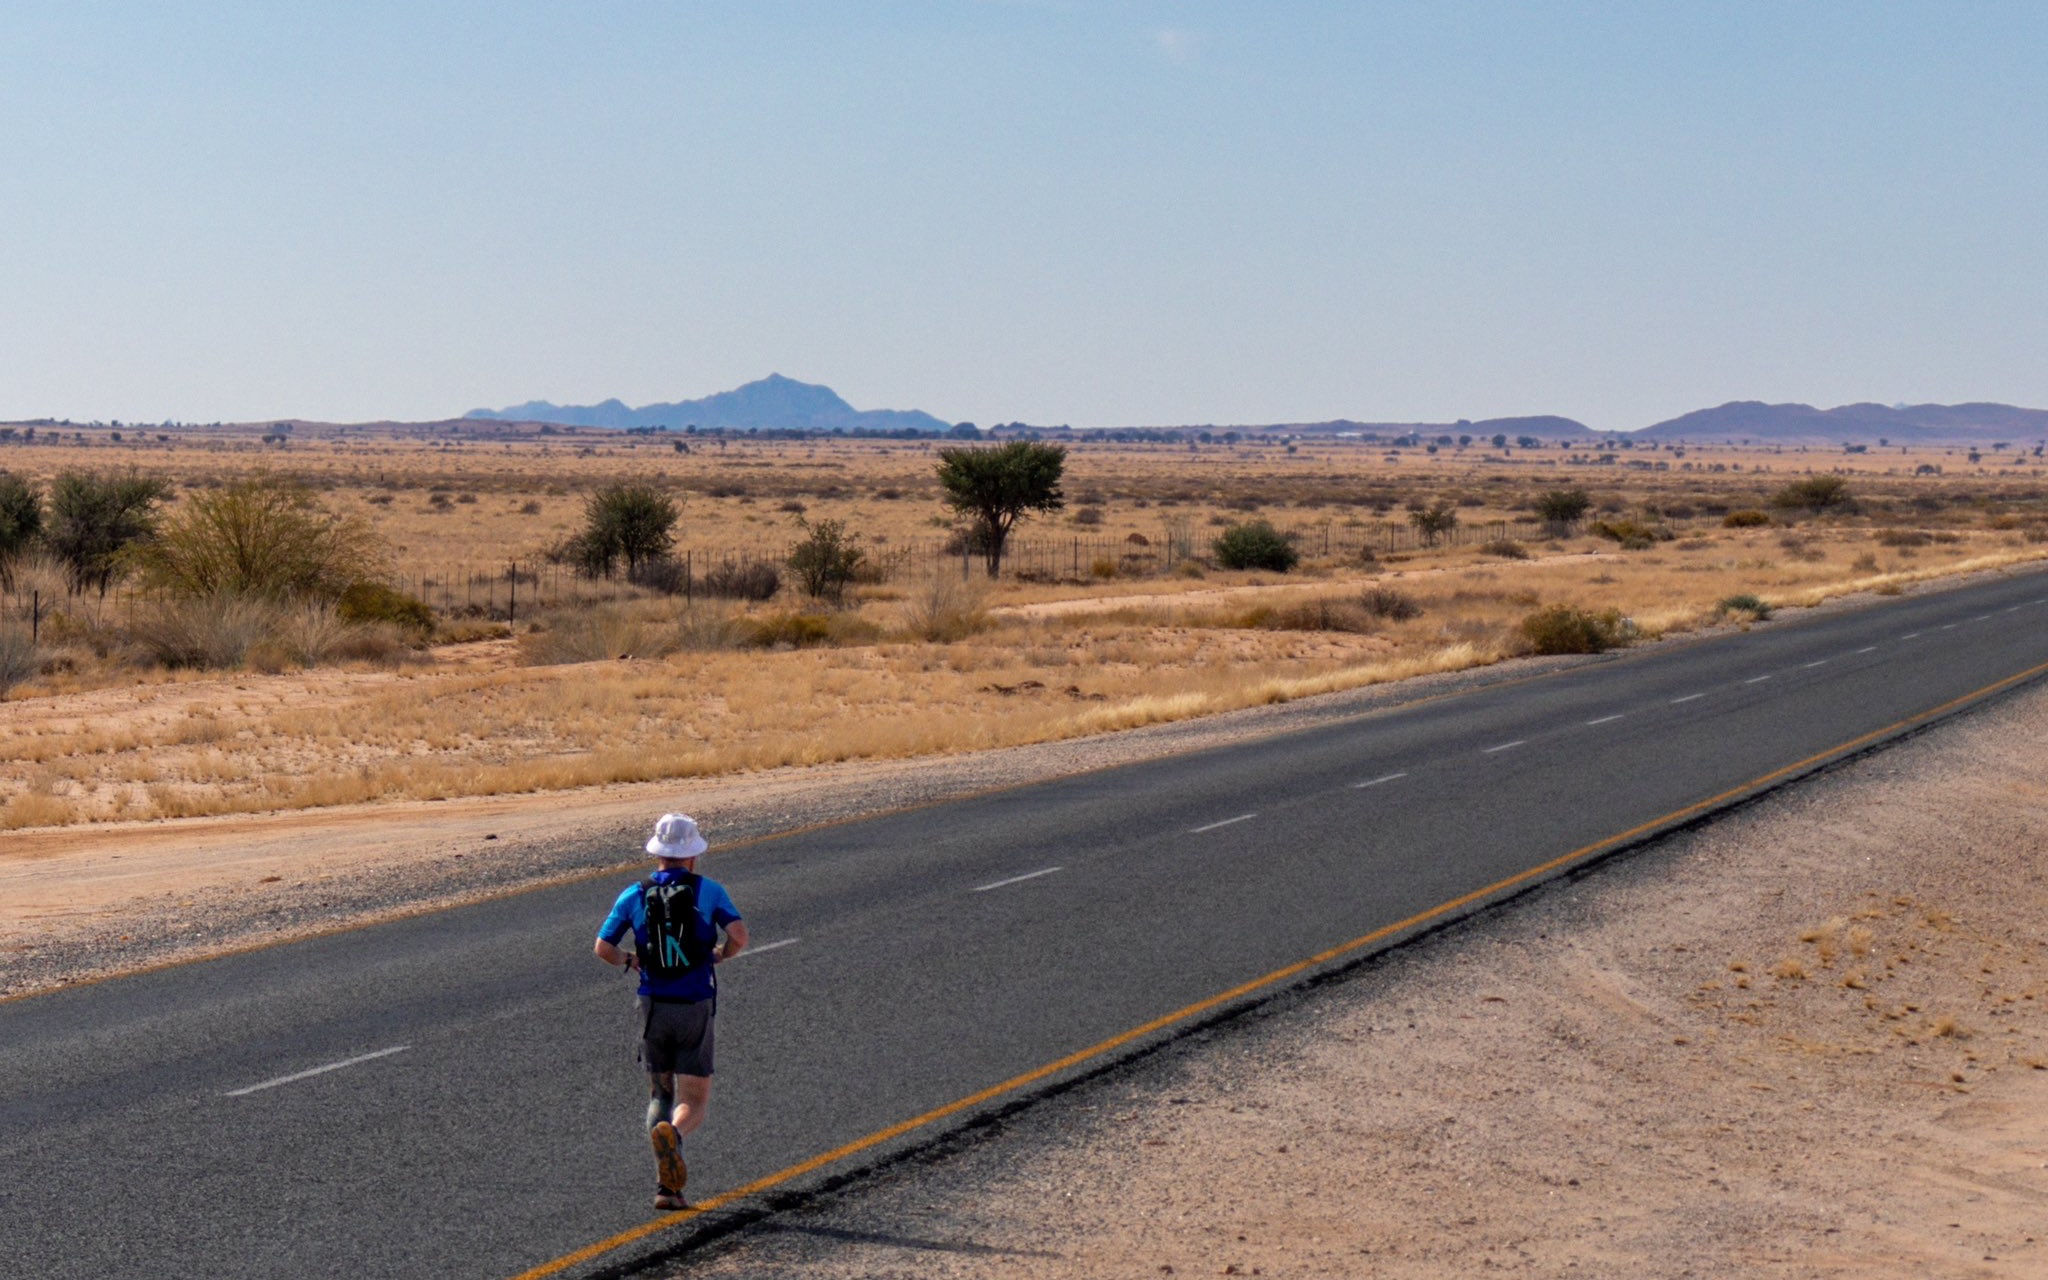 Hardest Geezer the man running the entire length of Africa